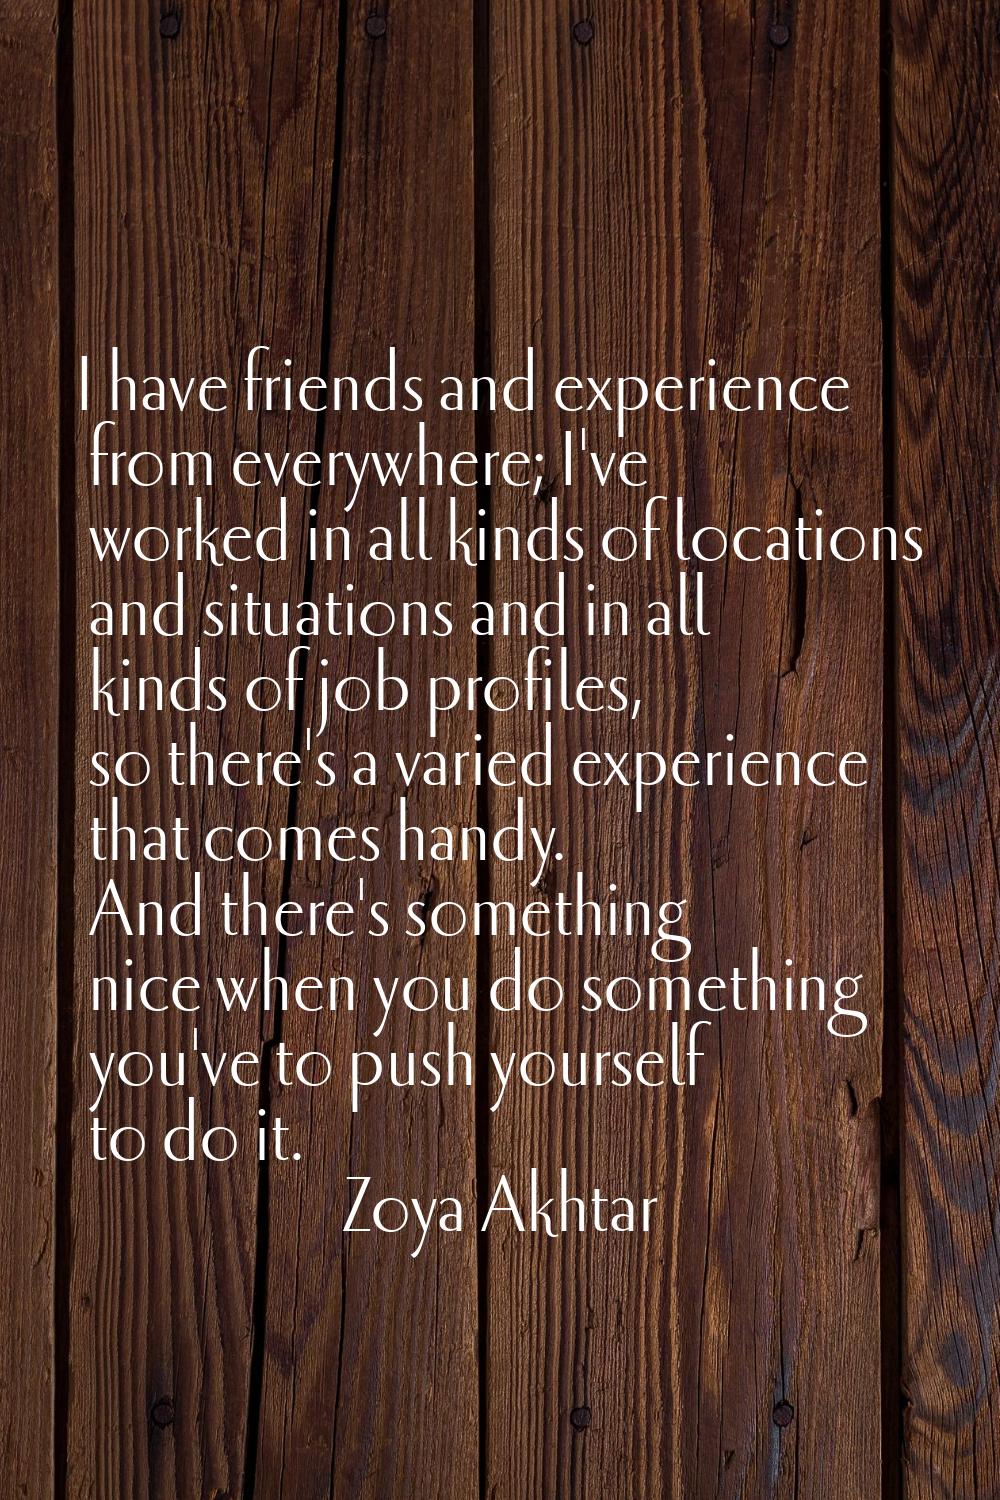 I have friends and experience from everywhere; I've worked in all kinds of locations and situations